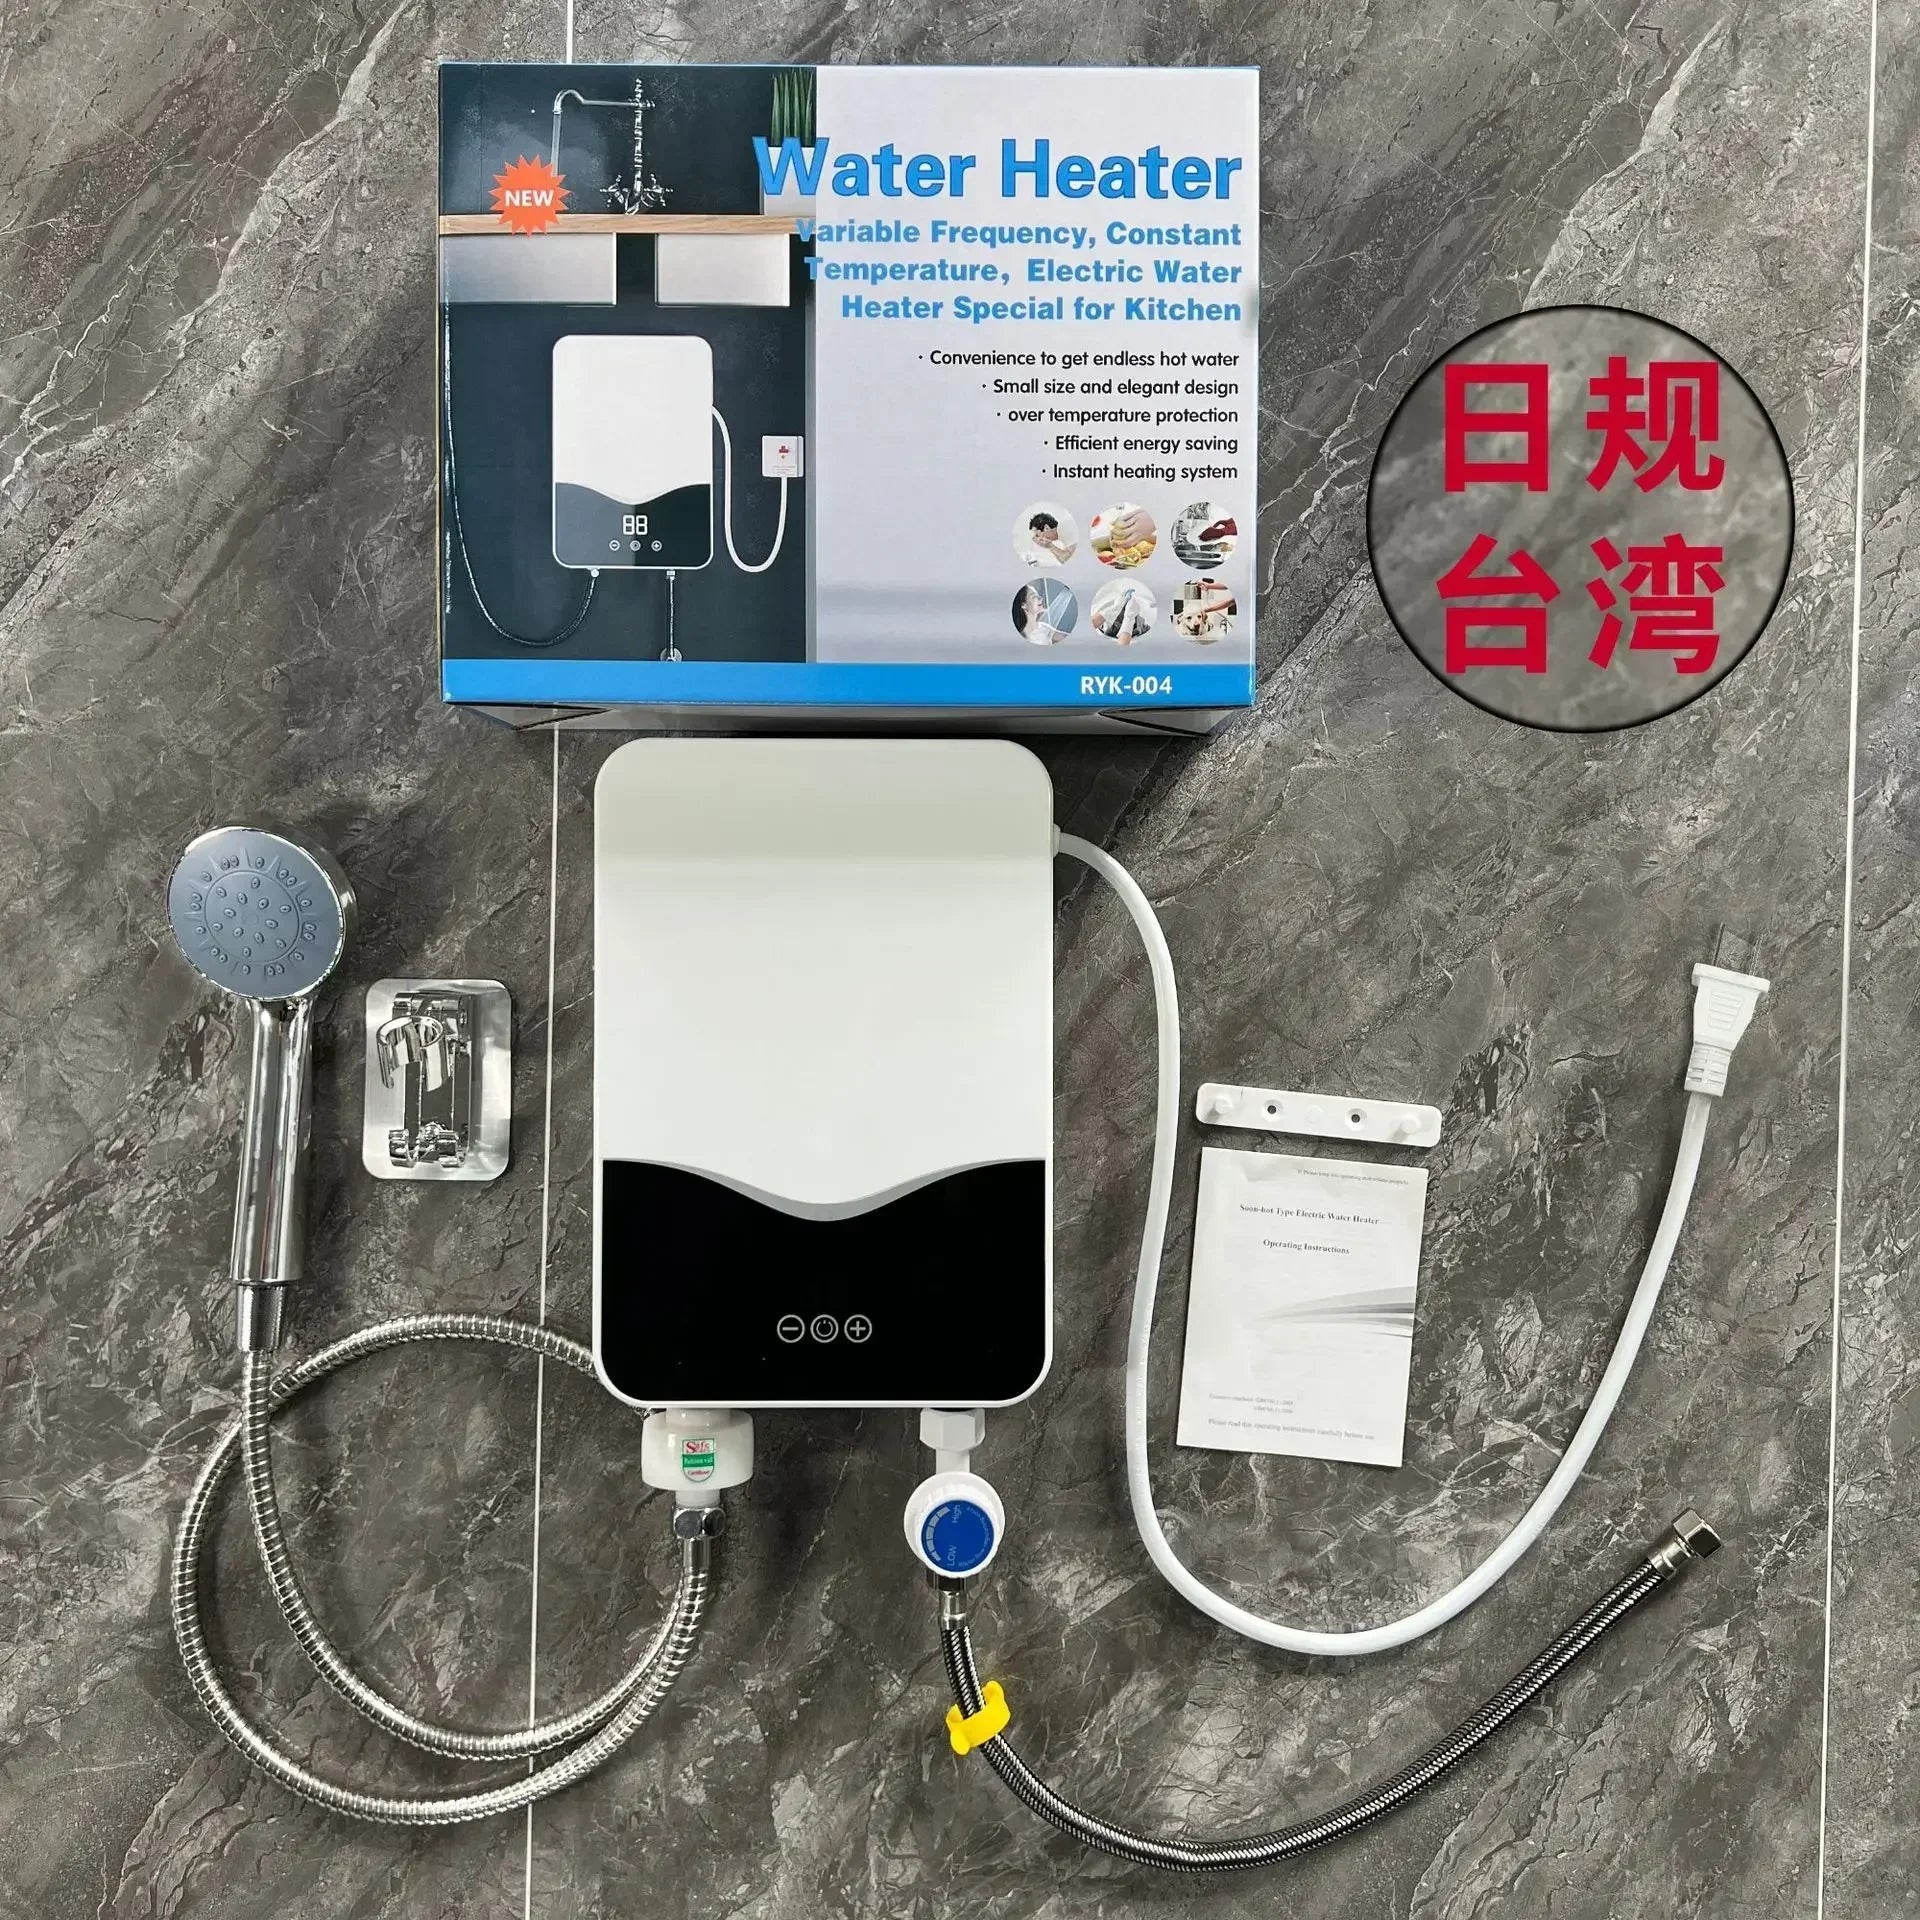 Instant Tankless Water Heater for Bathroom, 5.5kw Electric Instant Hot Water Heater with Self-modulating,Overheating Protection